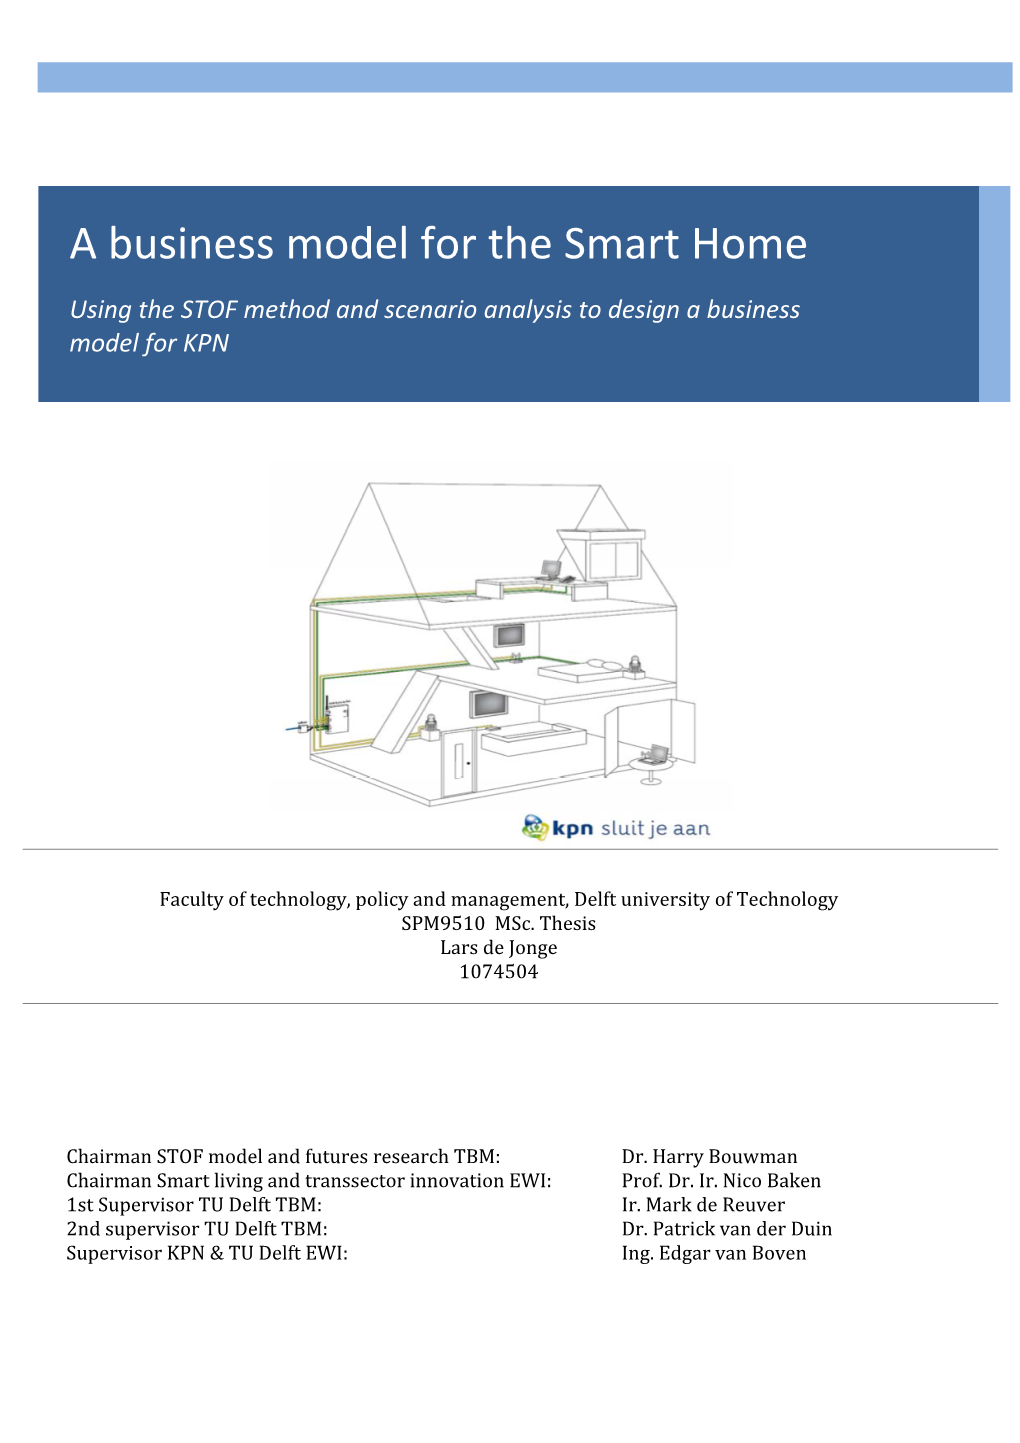 A Business Model for the Smart Home Using the STOF Method and Scenario Analysis to Design a Business Model for KPN